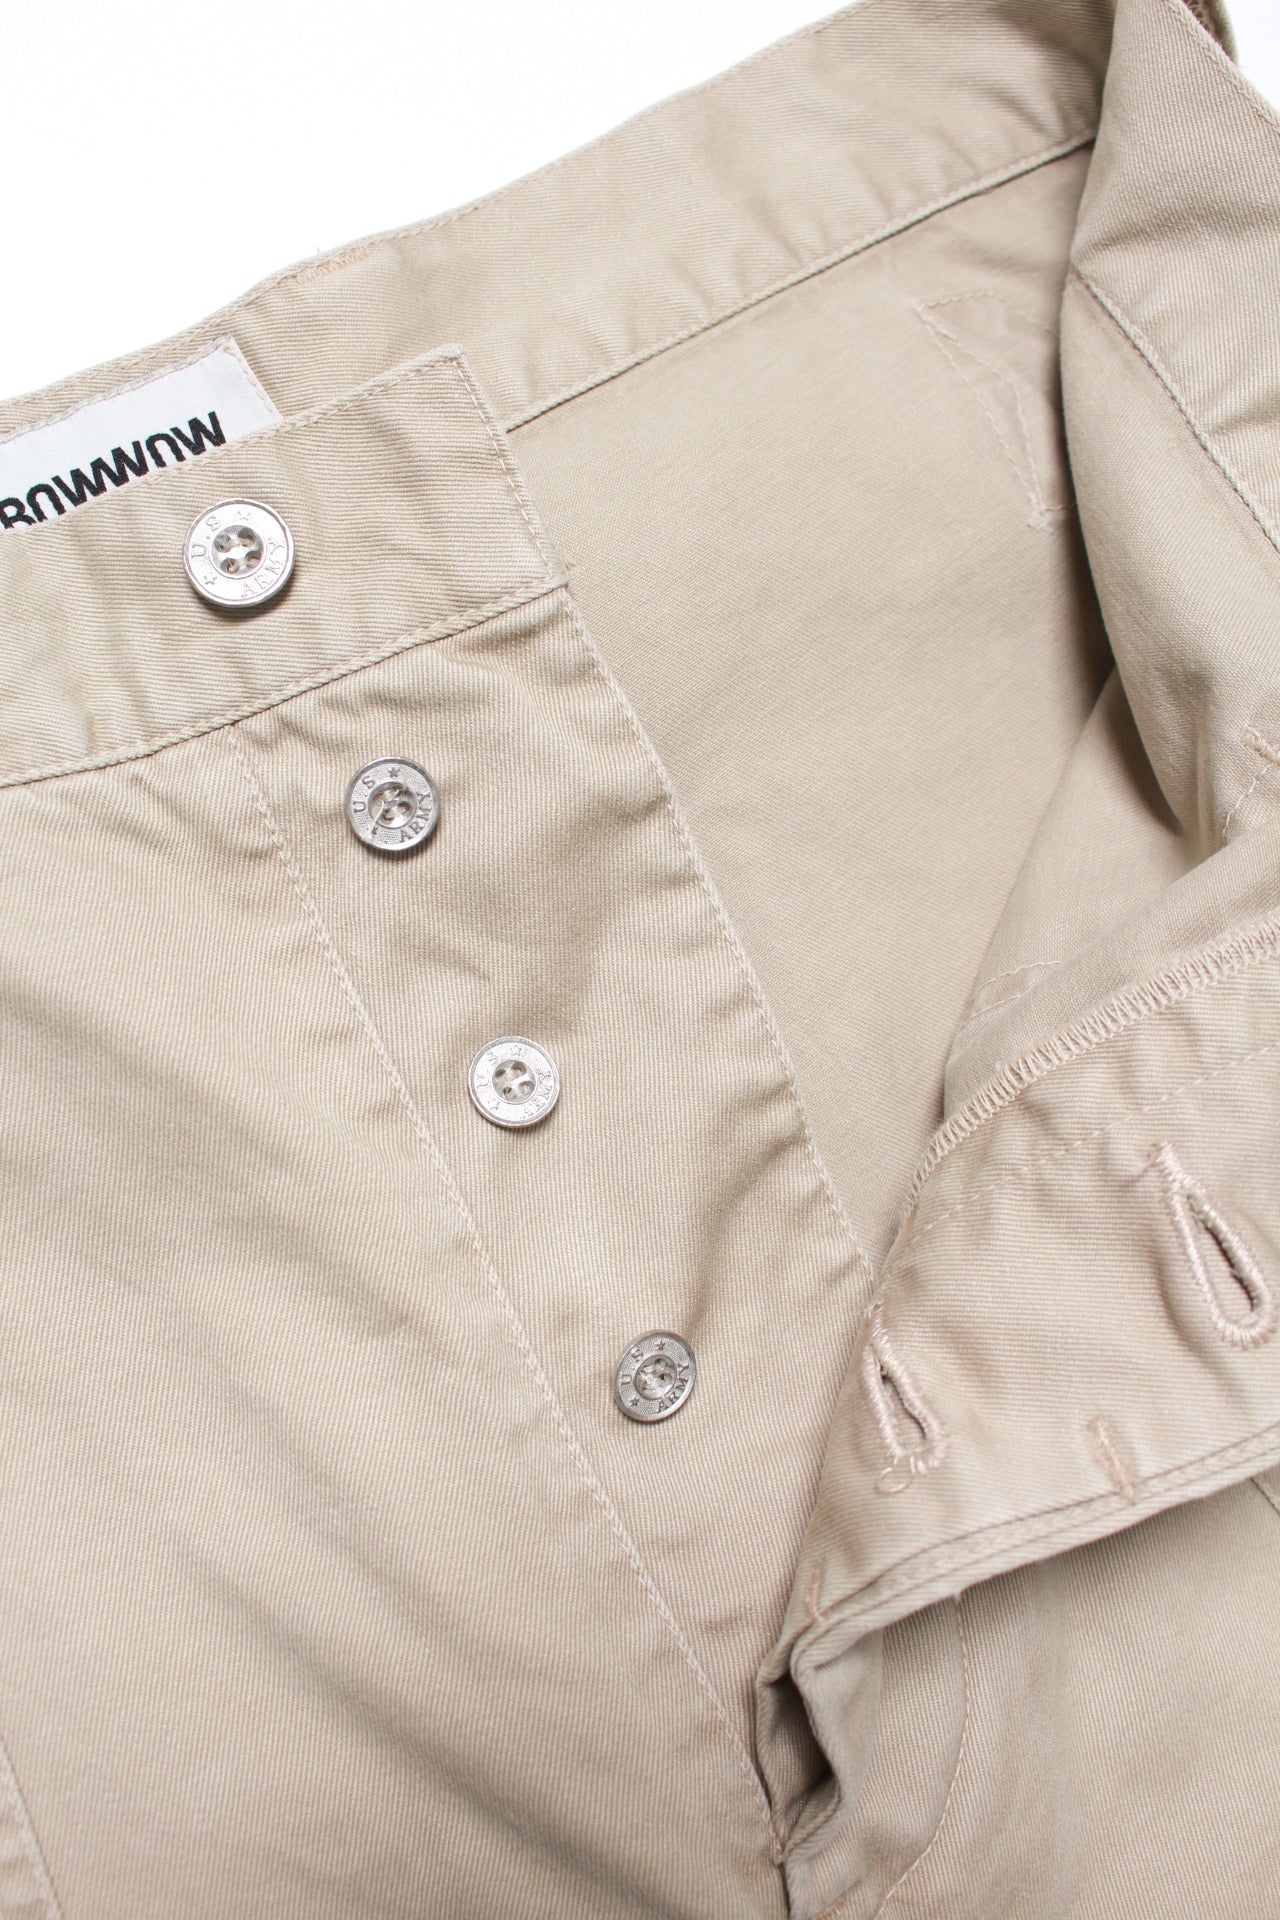 30s ARMY TROUSERS DUSTY – C30 - BOW WOW, RECOGNIZE FLAGSHIP SHOP